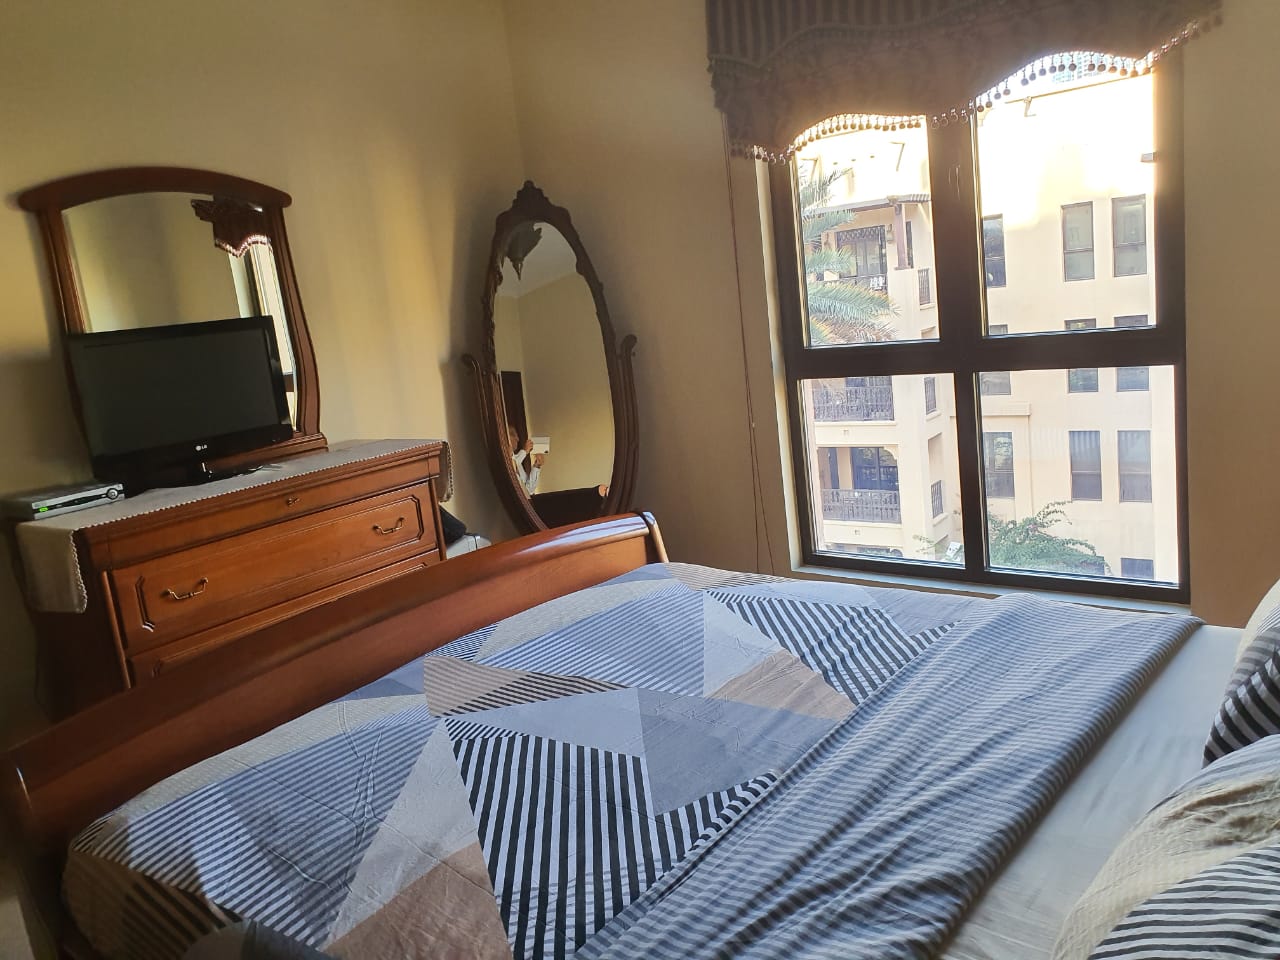 2 Br apartment in DOWNTOWN (oldtown)